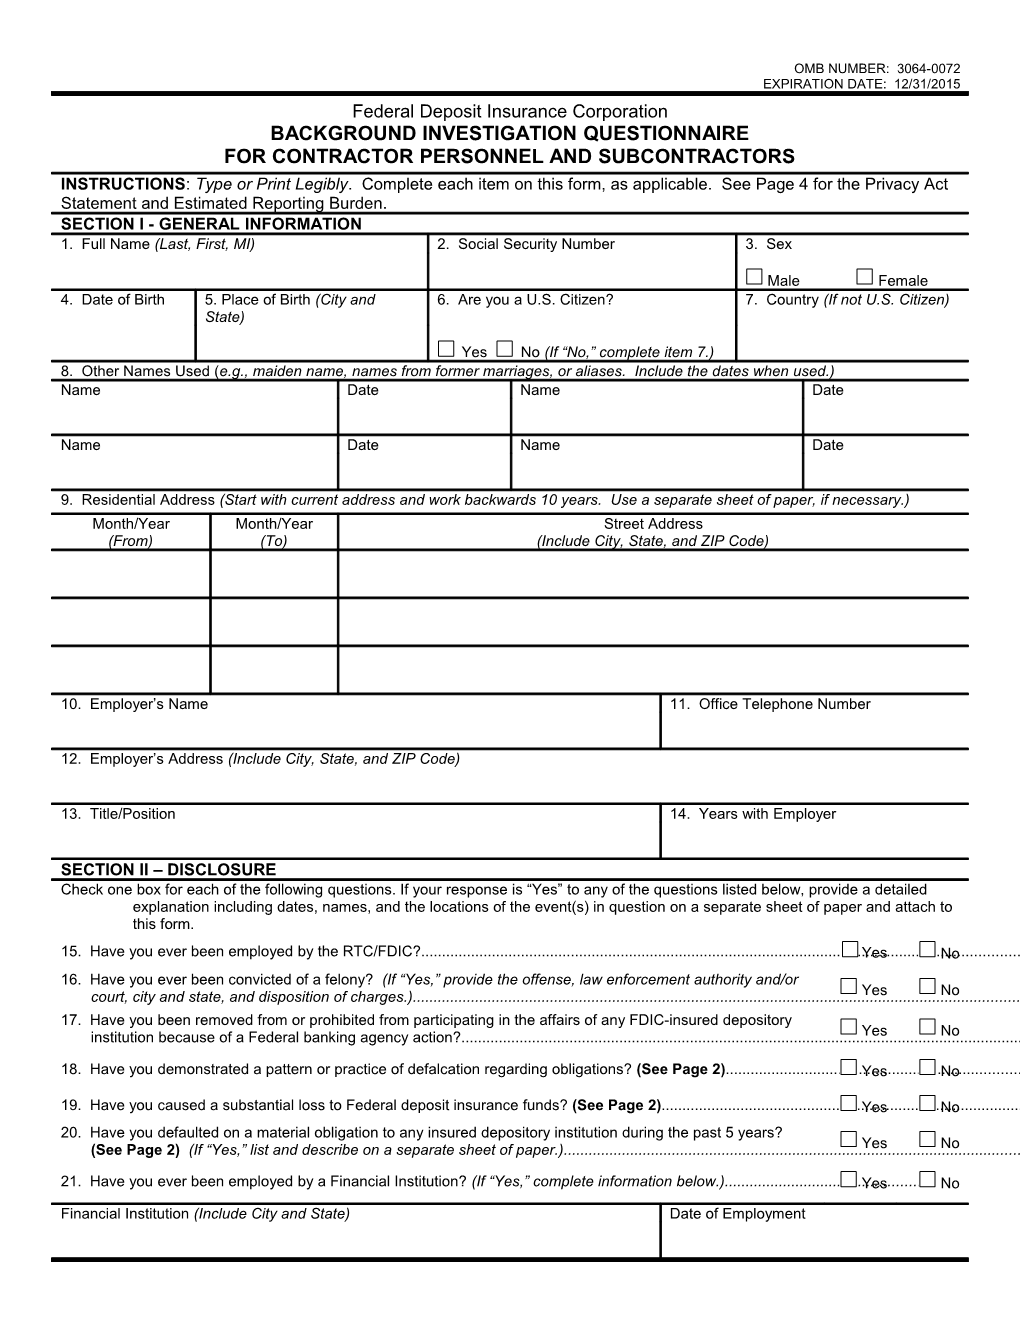 FDIC 1600/04, Background Investigation Questionnaire for Contractor Personnel and Subcontractor